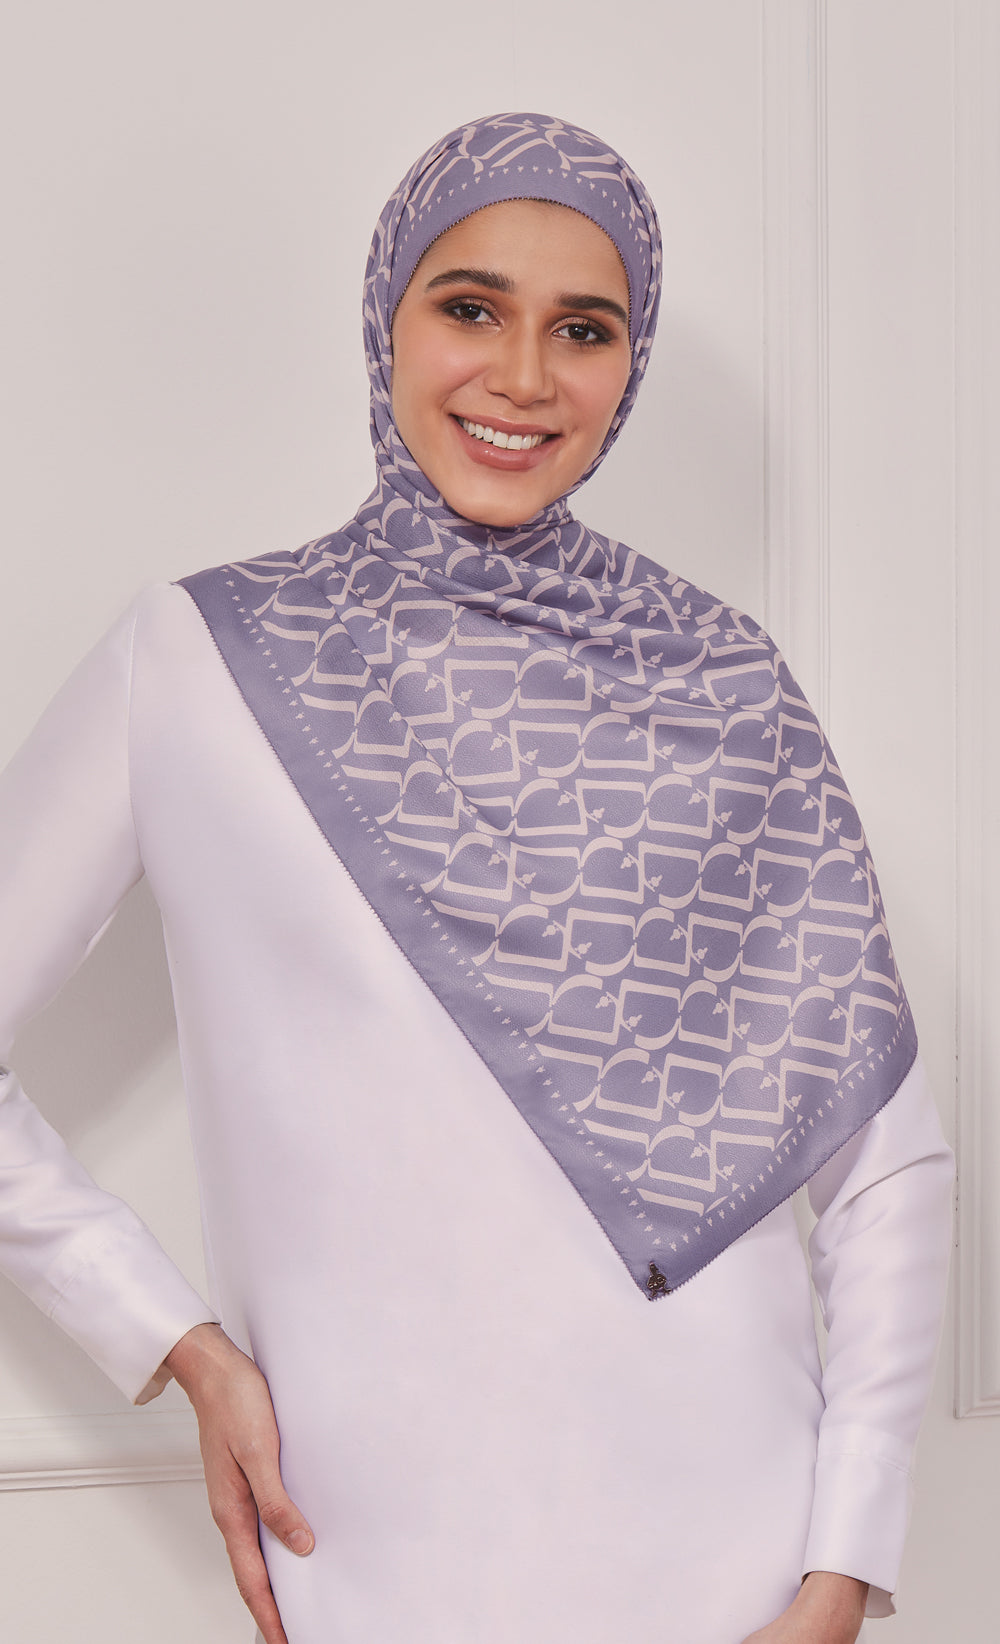 D Monogram dUCk Voile Shawl in Cotton Candy